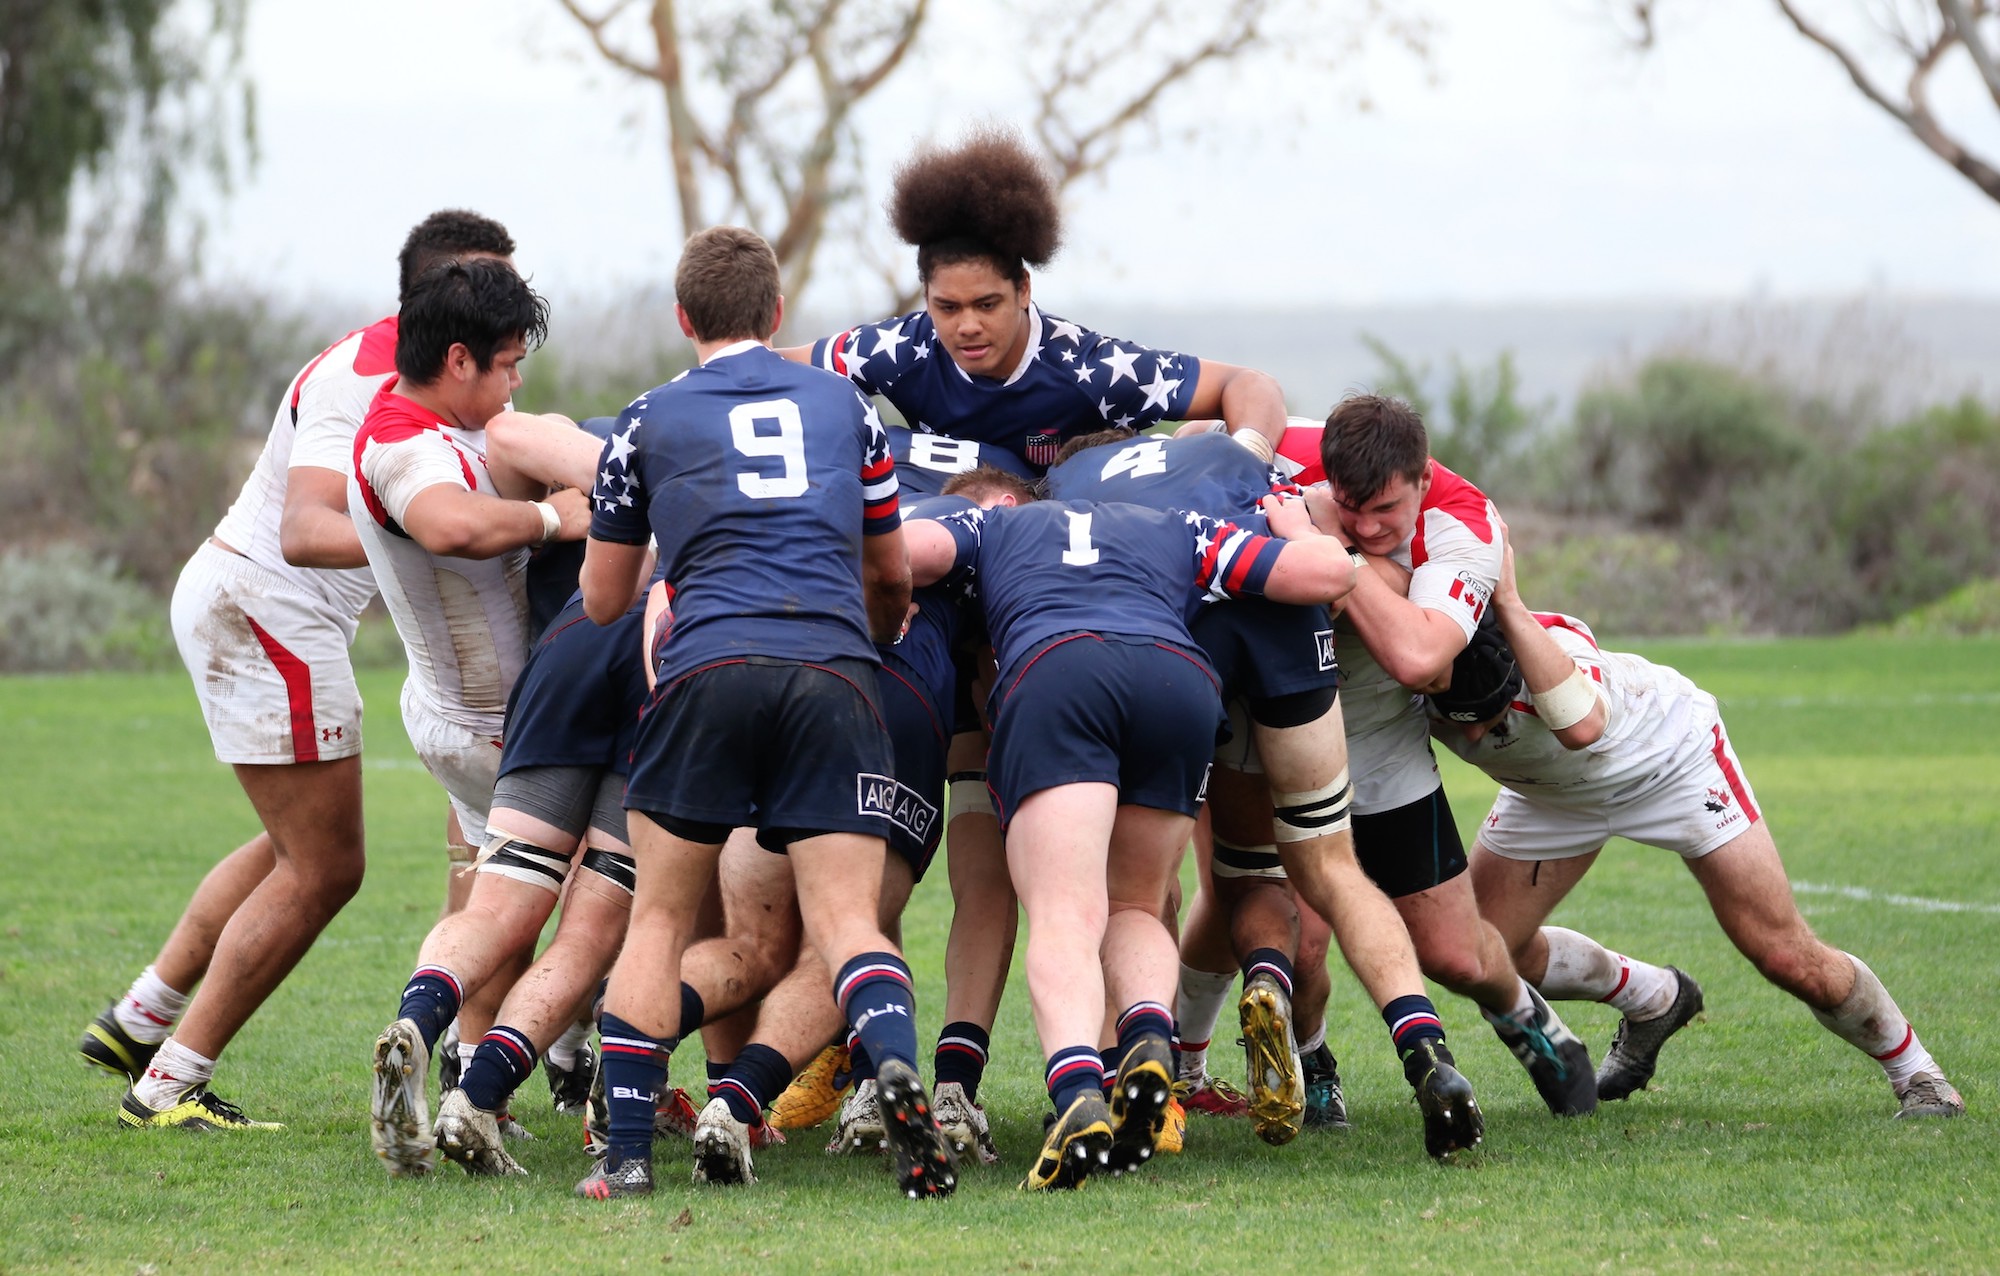 Maul for USA U19s rugby team in 2017. Ed Petersen photo.